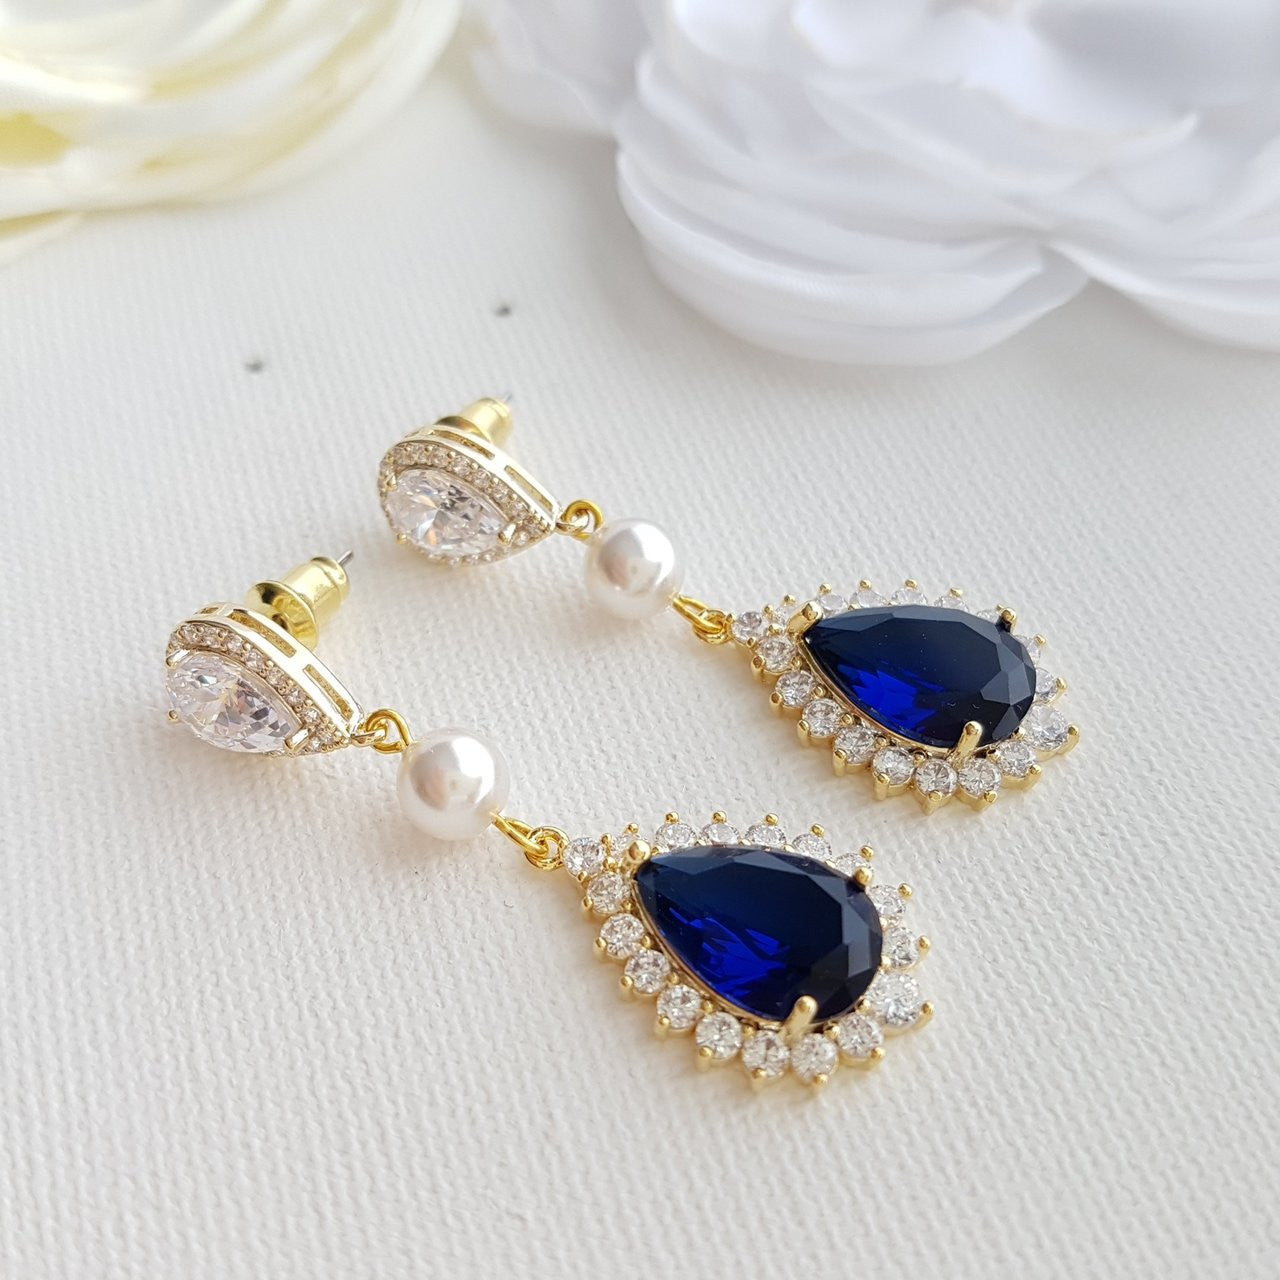 Blue and Gold Crystal Earrings with Pearls For Brides- Poetry Designs